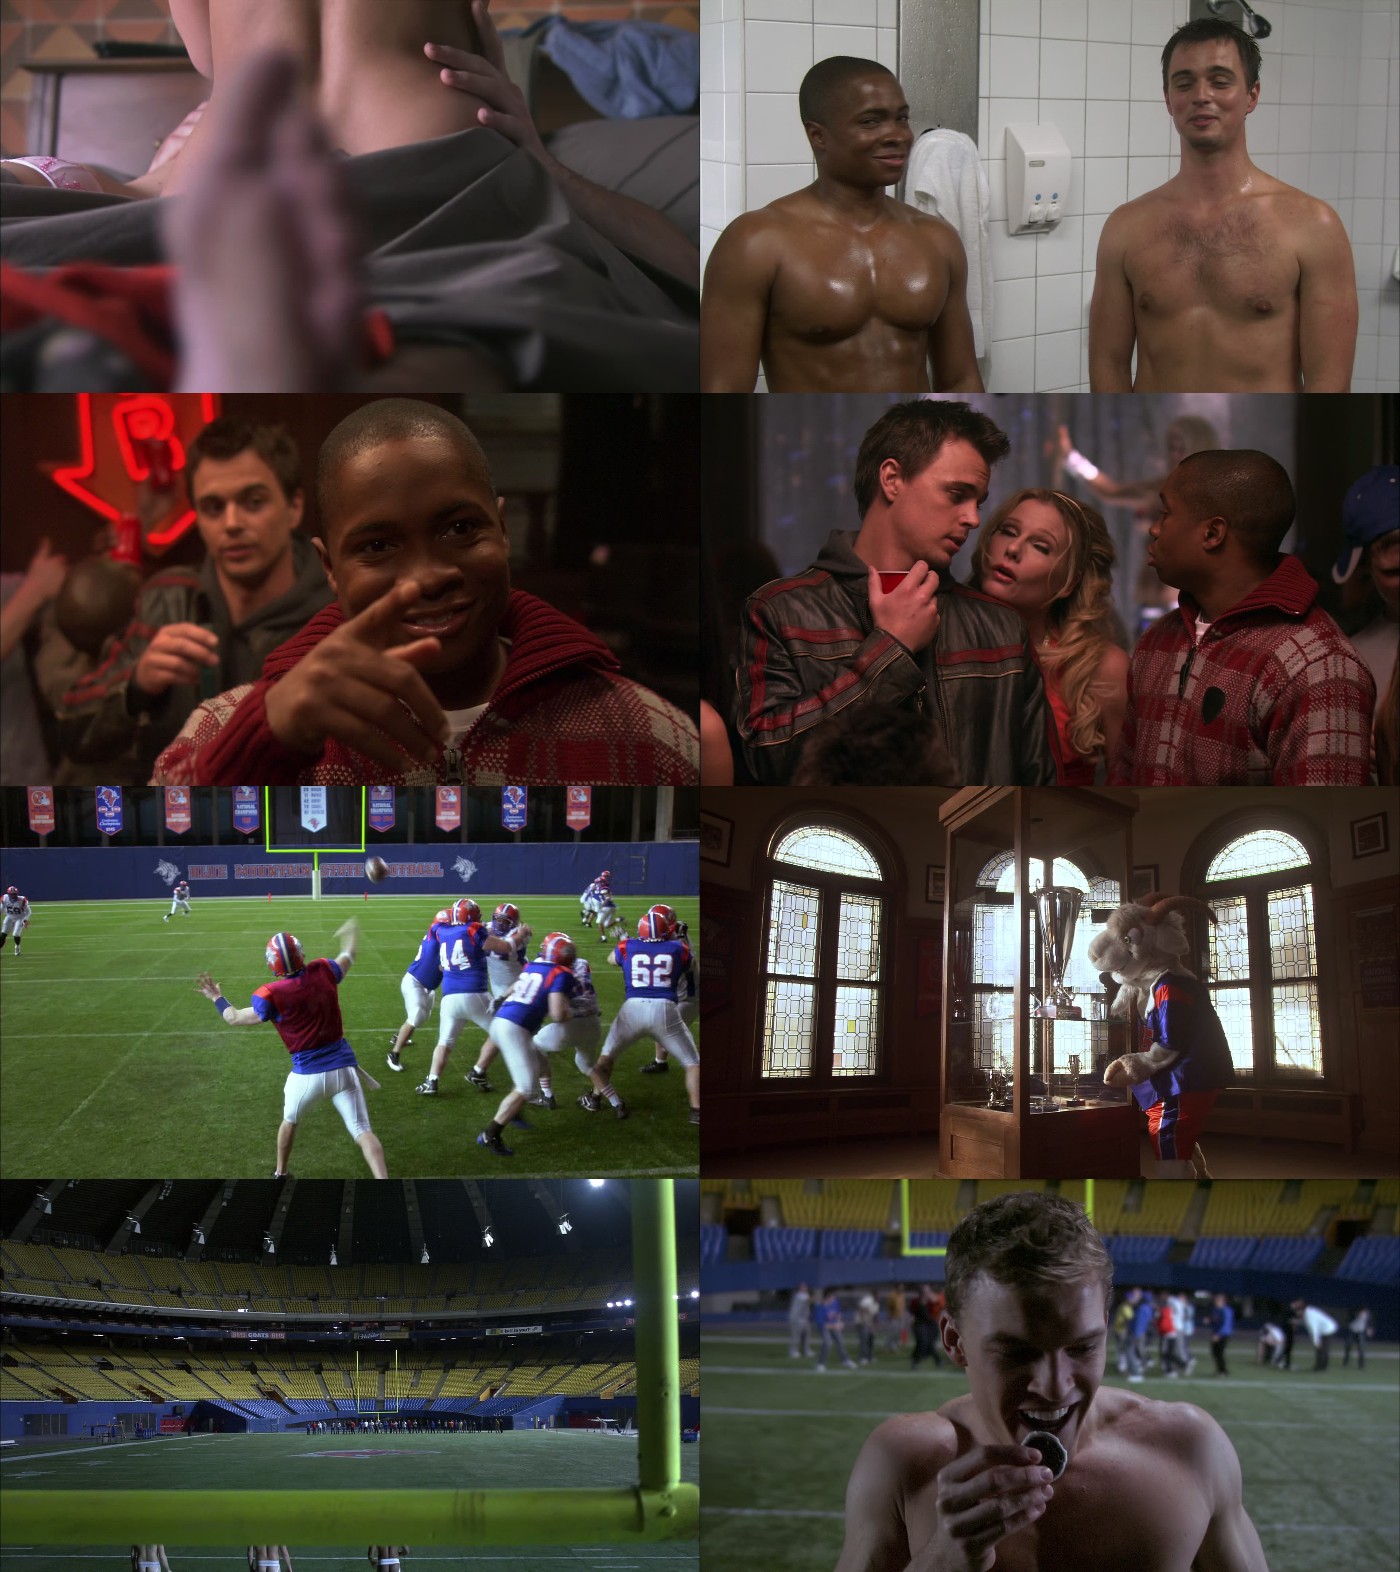 Blue Mountain State S01 S03 COMPLETE SERIES 1080p Bluray x265 HiQVE